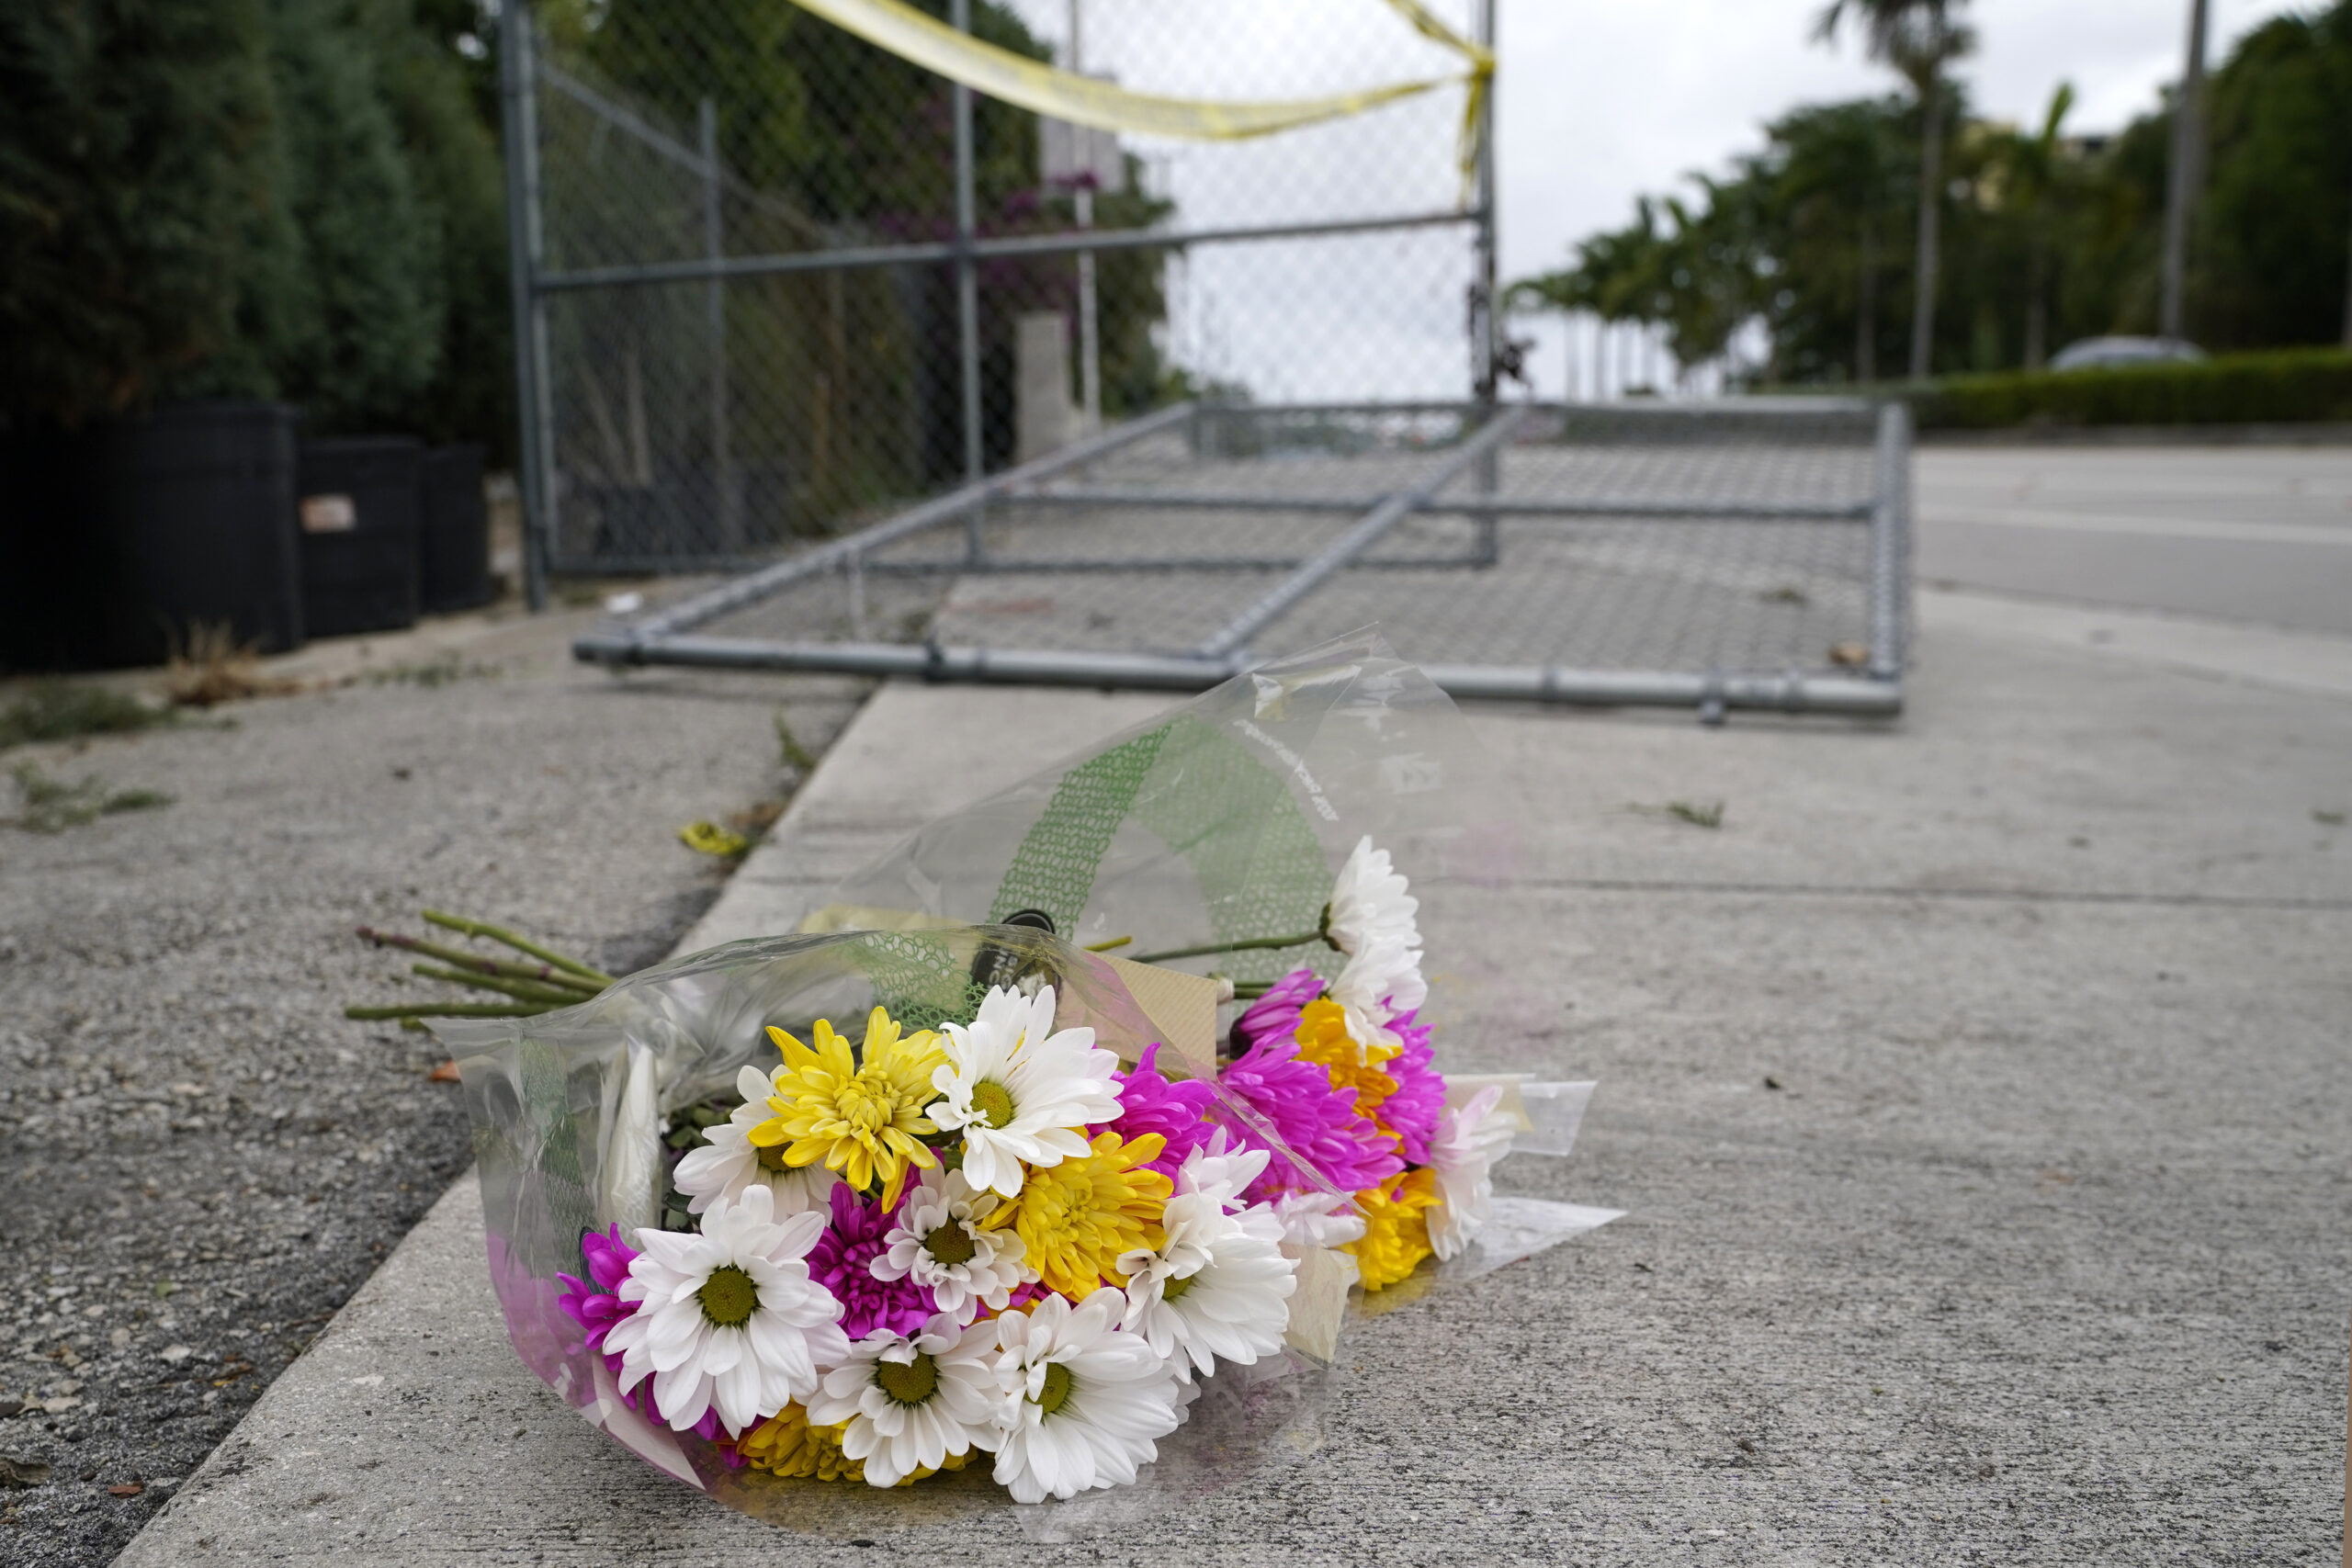 Flowers lie at the scene where a driver slammed into spectators at the start of a Pride parade Saturday evening, killing one man and seriously injuring another, Sunday, June 20, 2021, in Fort Lauderdale, Fla. Officials said the crash was an accident, but it initially drew speculation that it was a hate crime directed at the gay community. The driver and victims were all members of the Fort Lauderdale Gay Men's Chorus, who were participating in the Wilton Manors Stonewall Pride Parade. (AP Photo/Lynne Sladky)